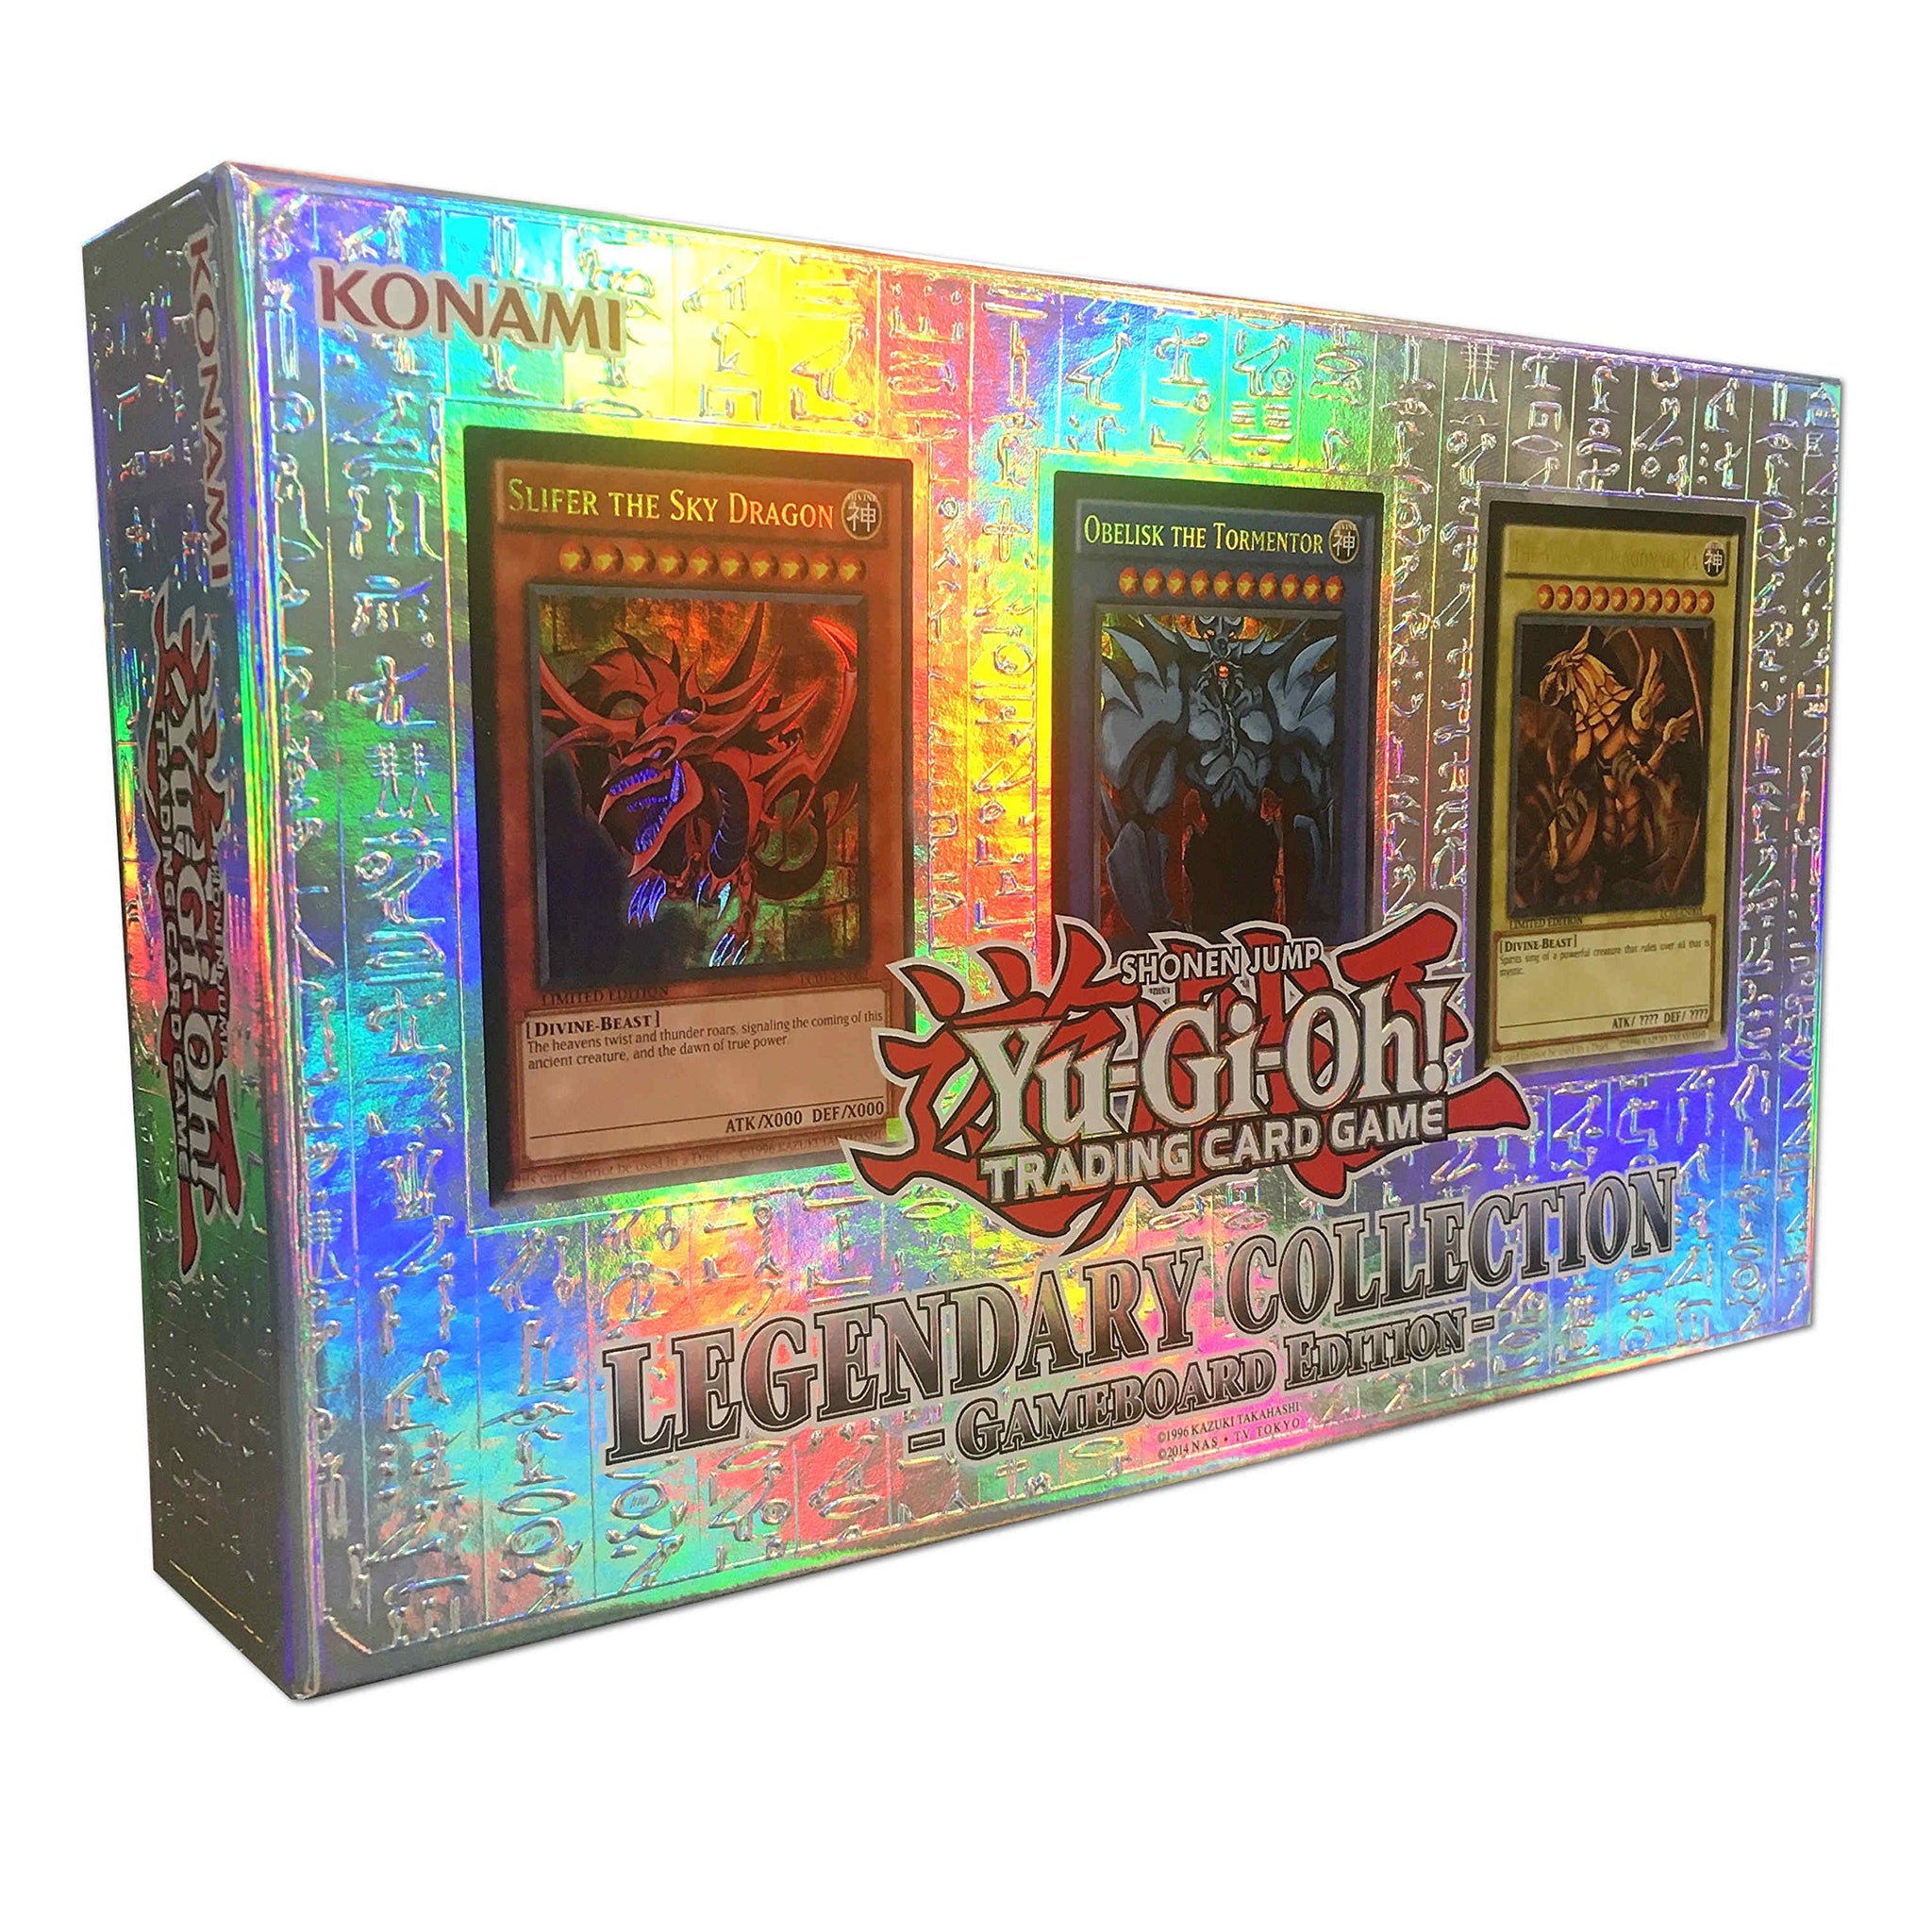 Yu-Gi-Oh! Legendary Collection 1 Box Gameboard Edition